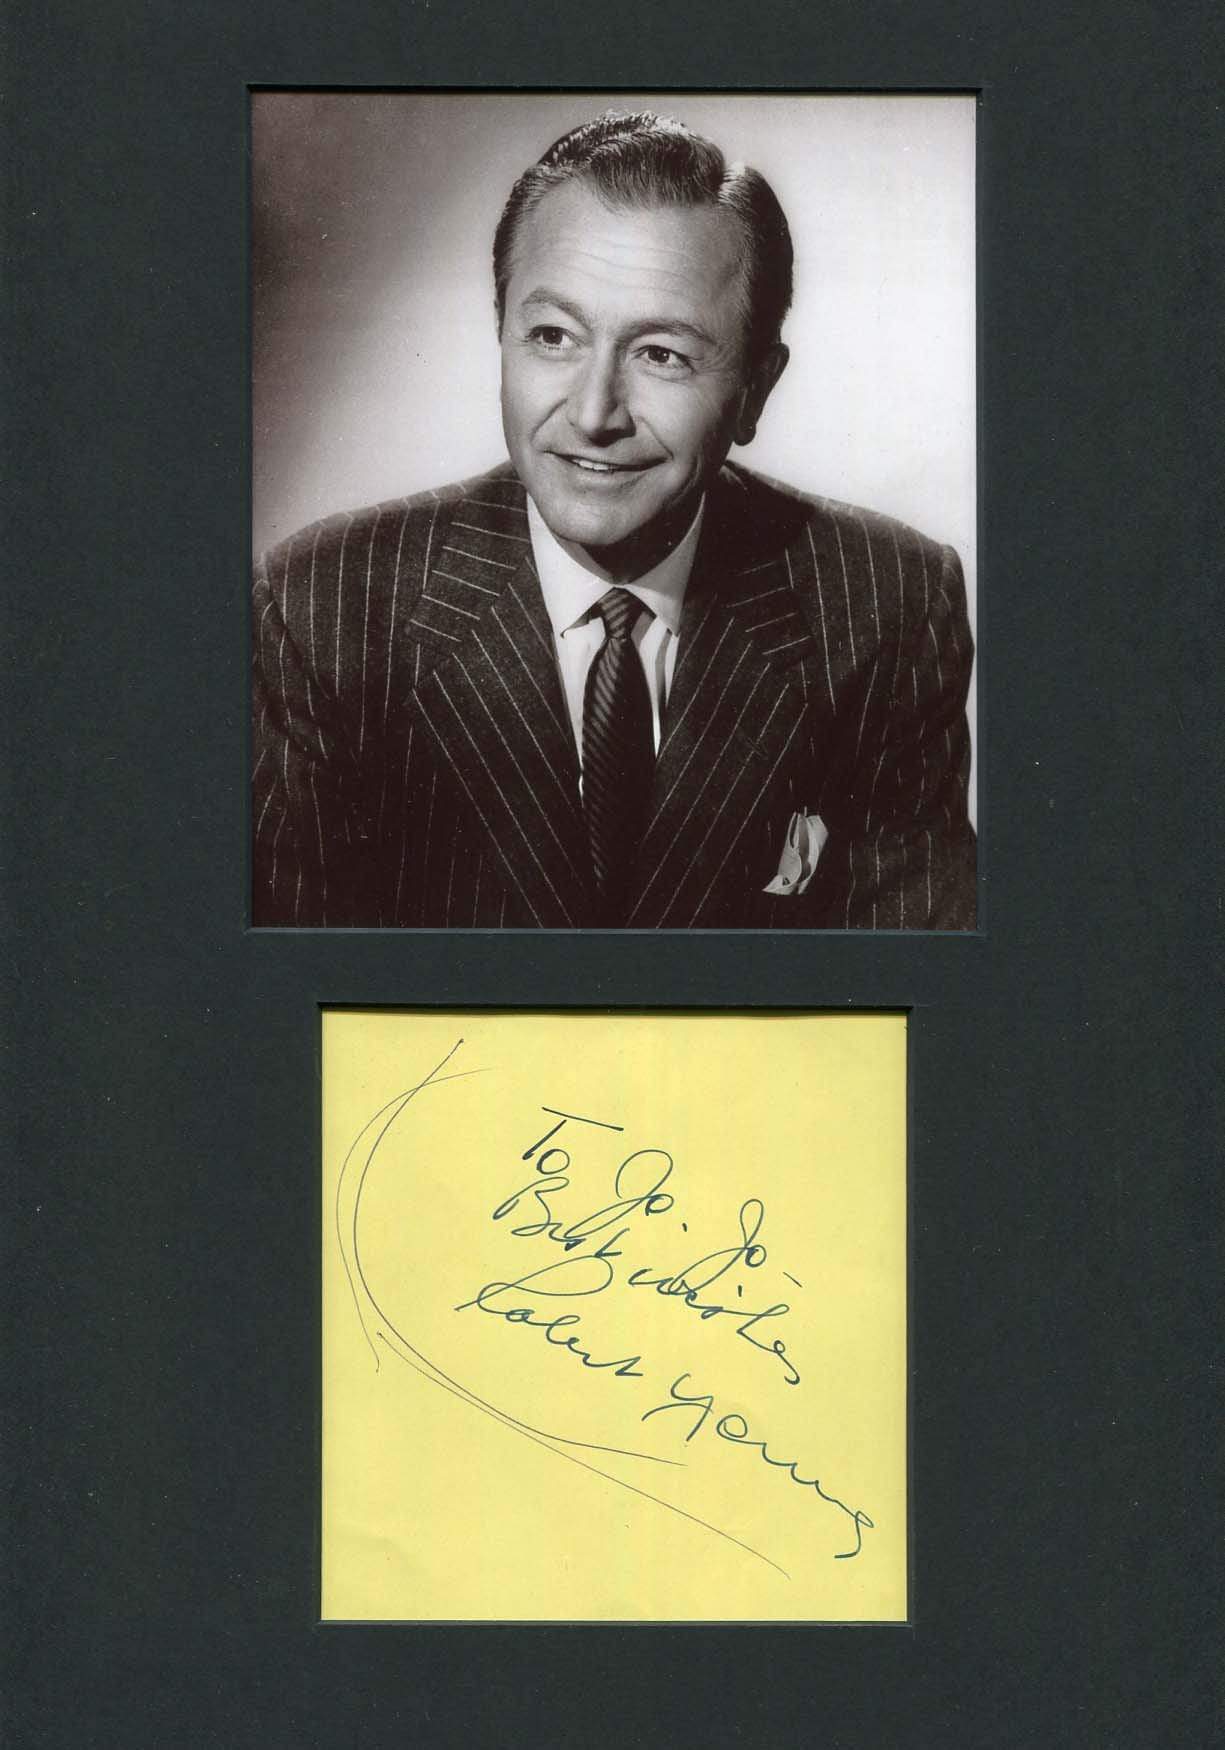 Robert George Young Autograph Autogramm | ID 6952703066261